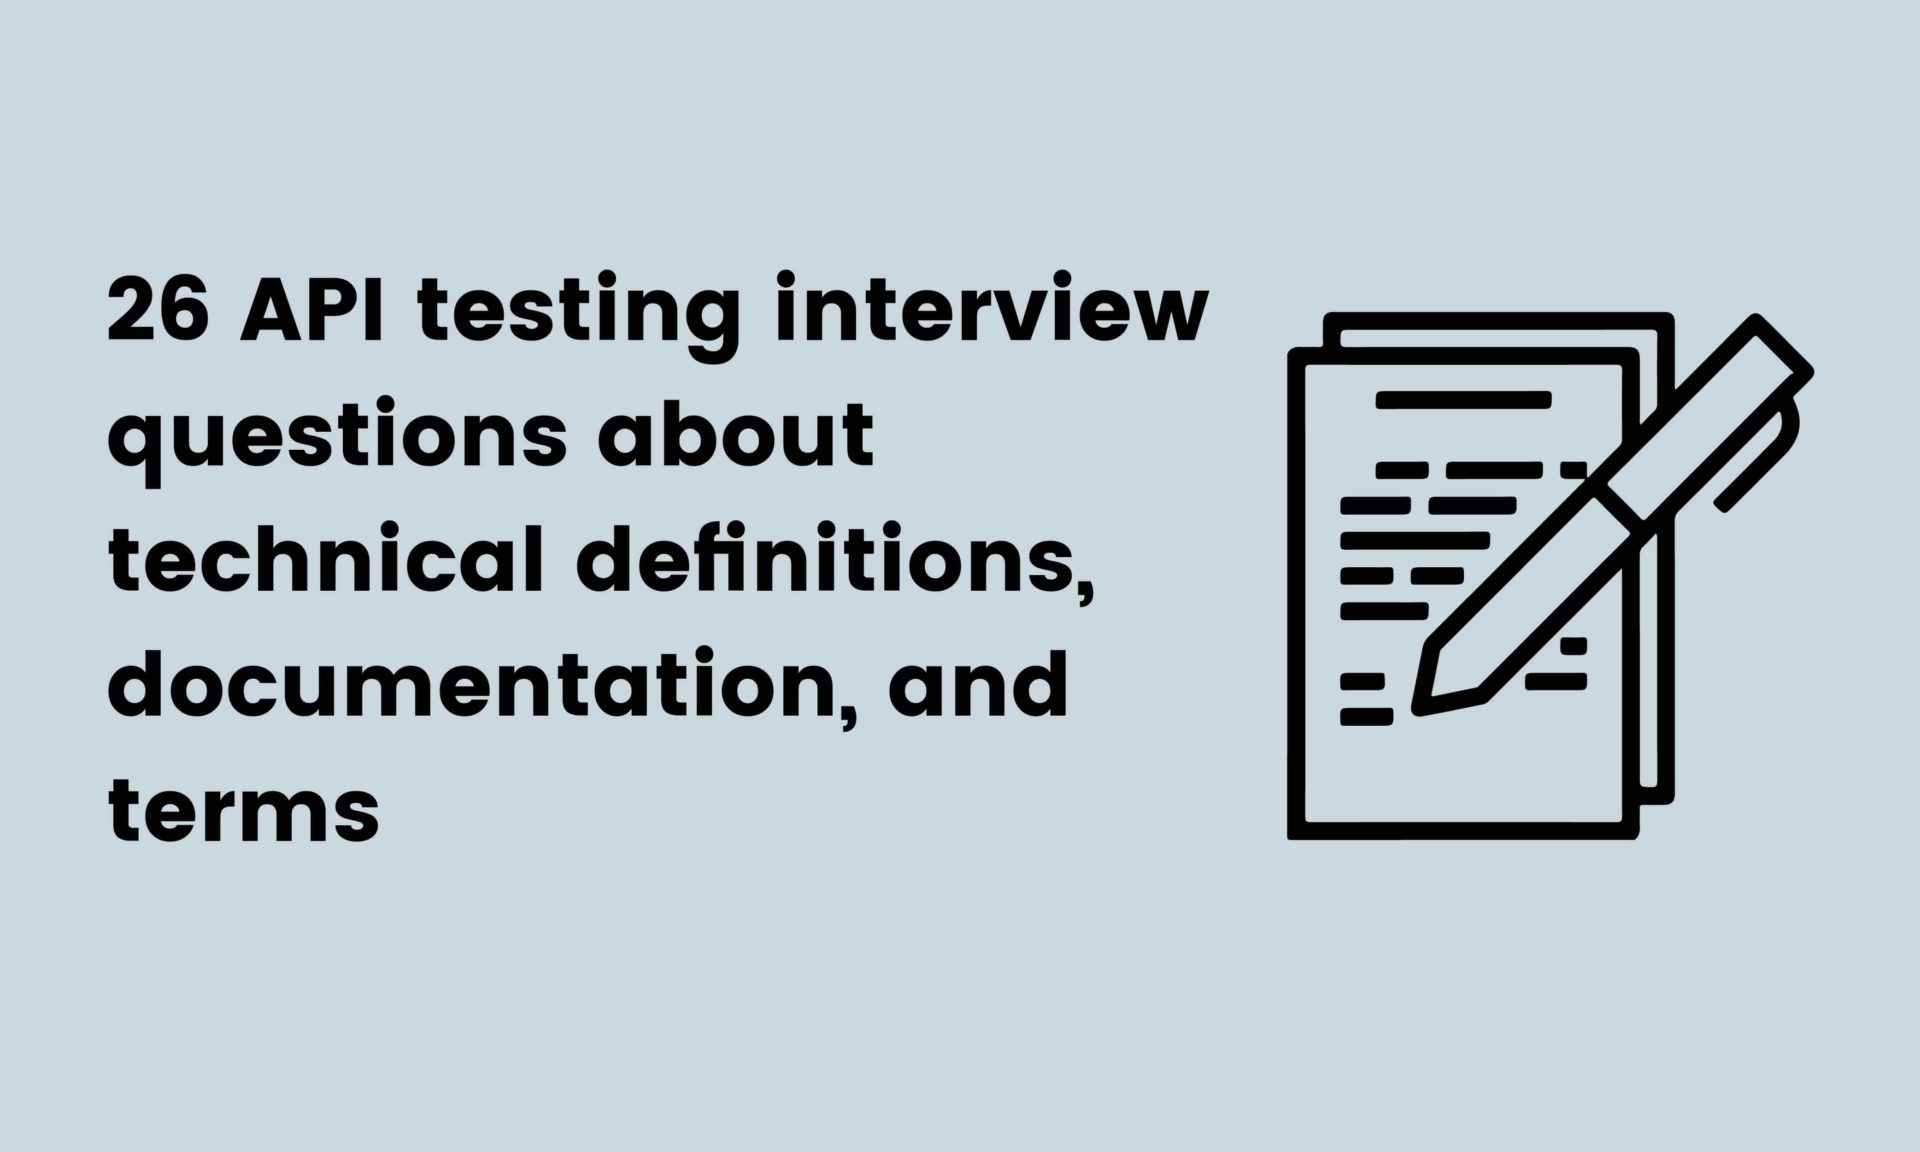 26 API testing interview questions about technical definitions, documentation, and terms